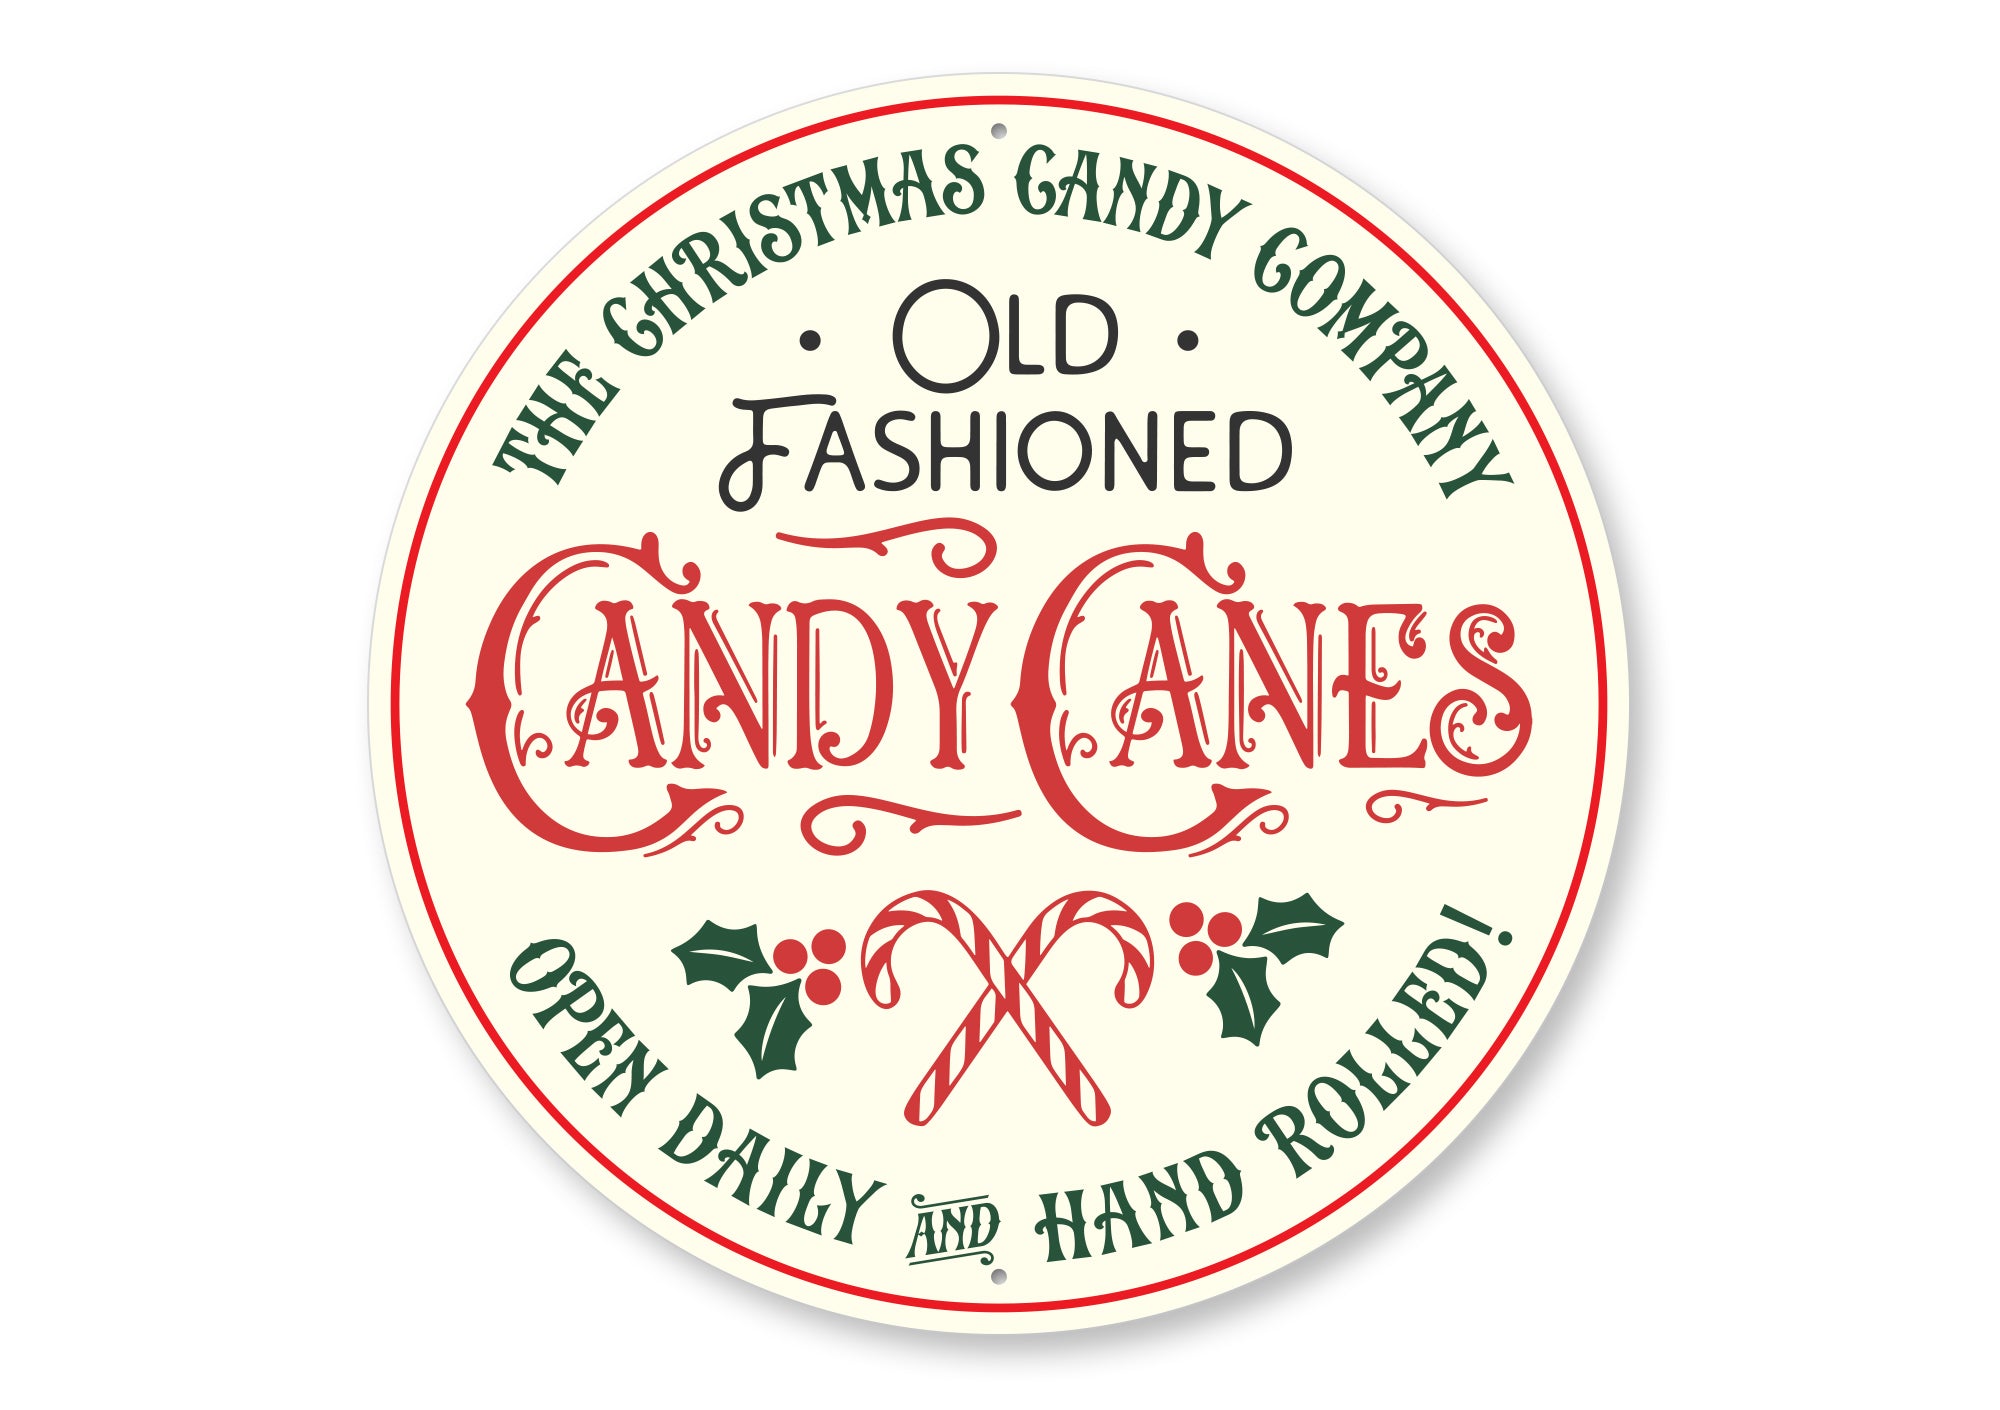 Handrolled Candy Cane Factory Sign